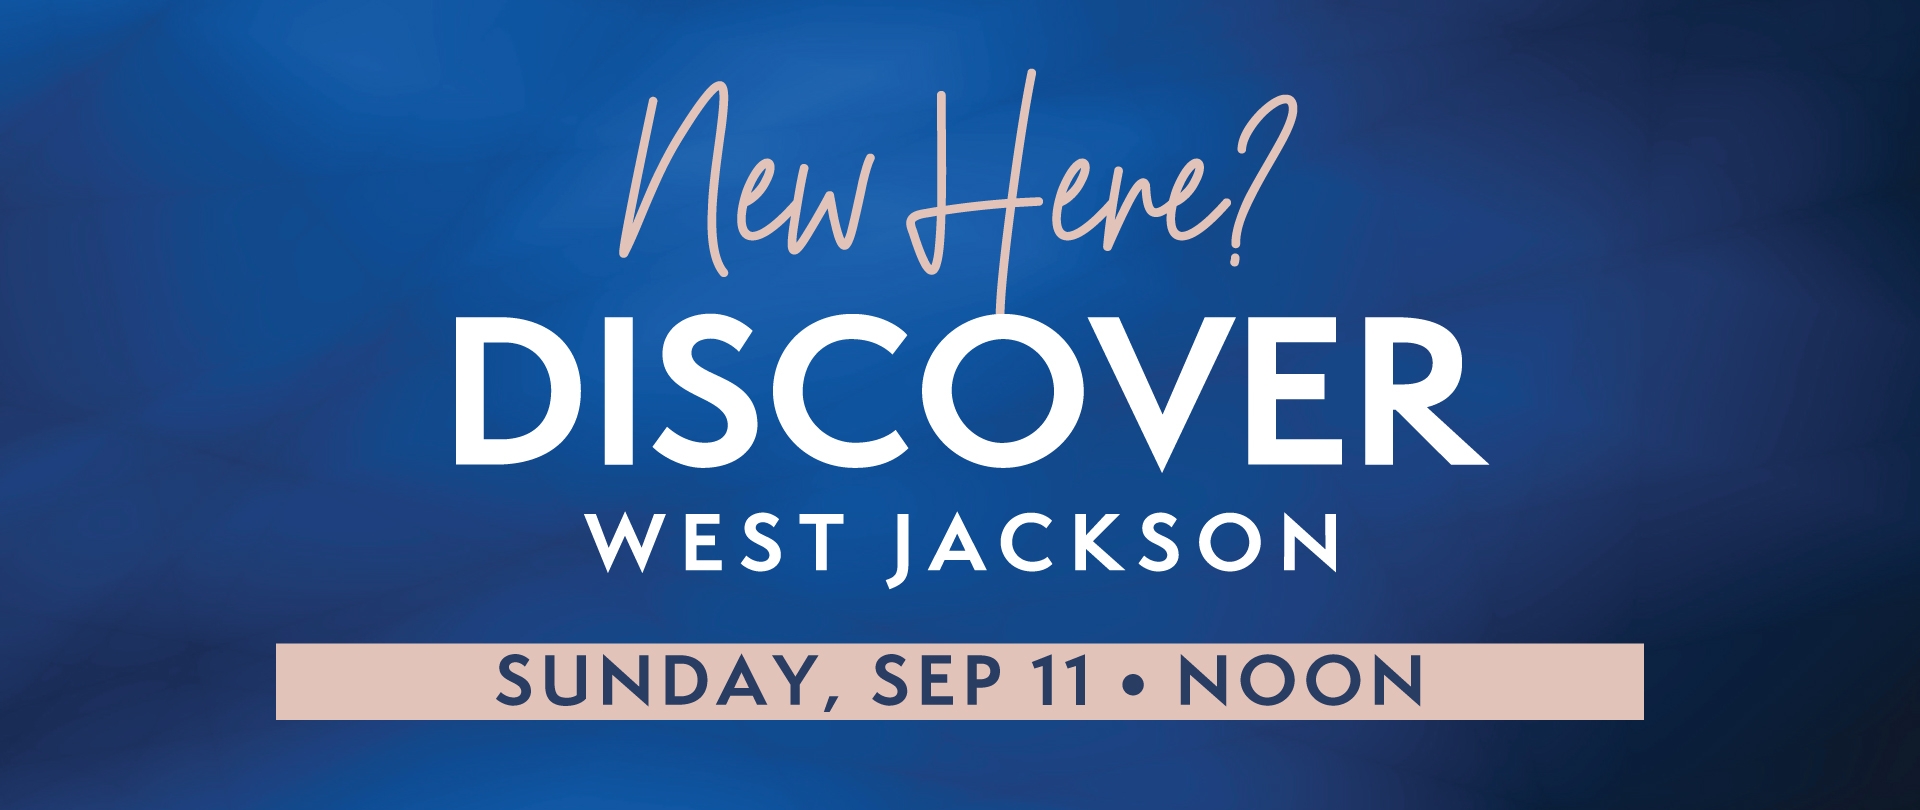 New Here? Discover West Jackson. Sunday, Sep 11 • Noon